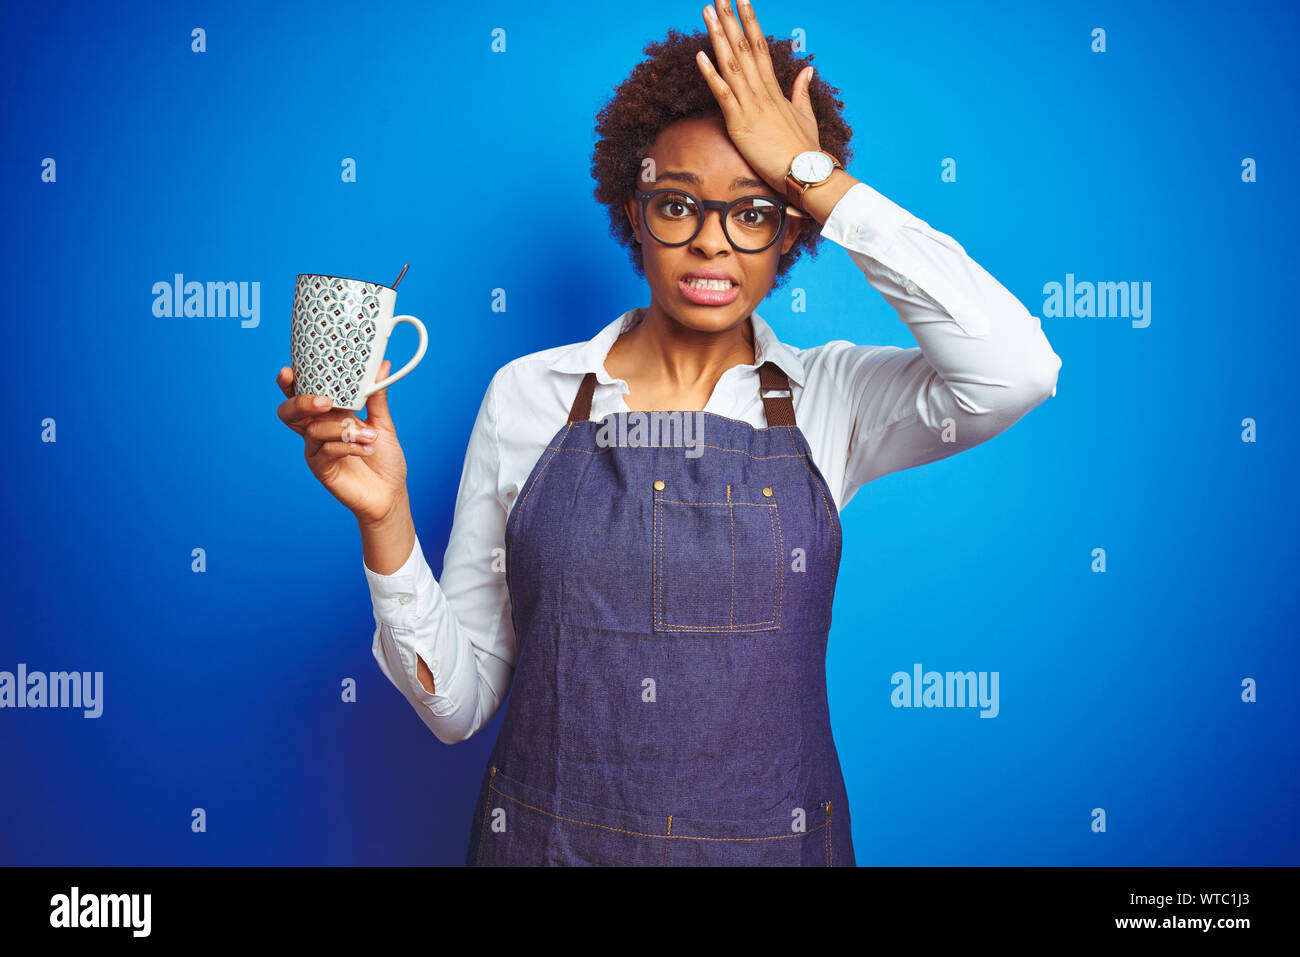 African american barista woman wearing bartender uniform holding cup over blue background stressed with hand on head, shocked with shame and surprise Stock Photo